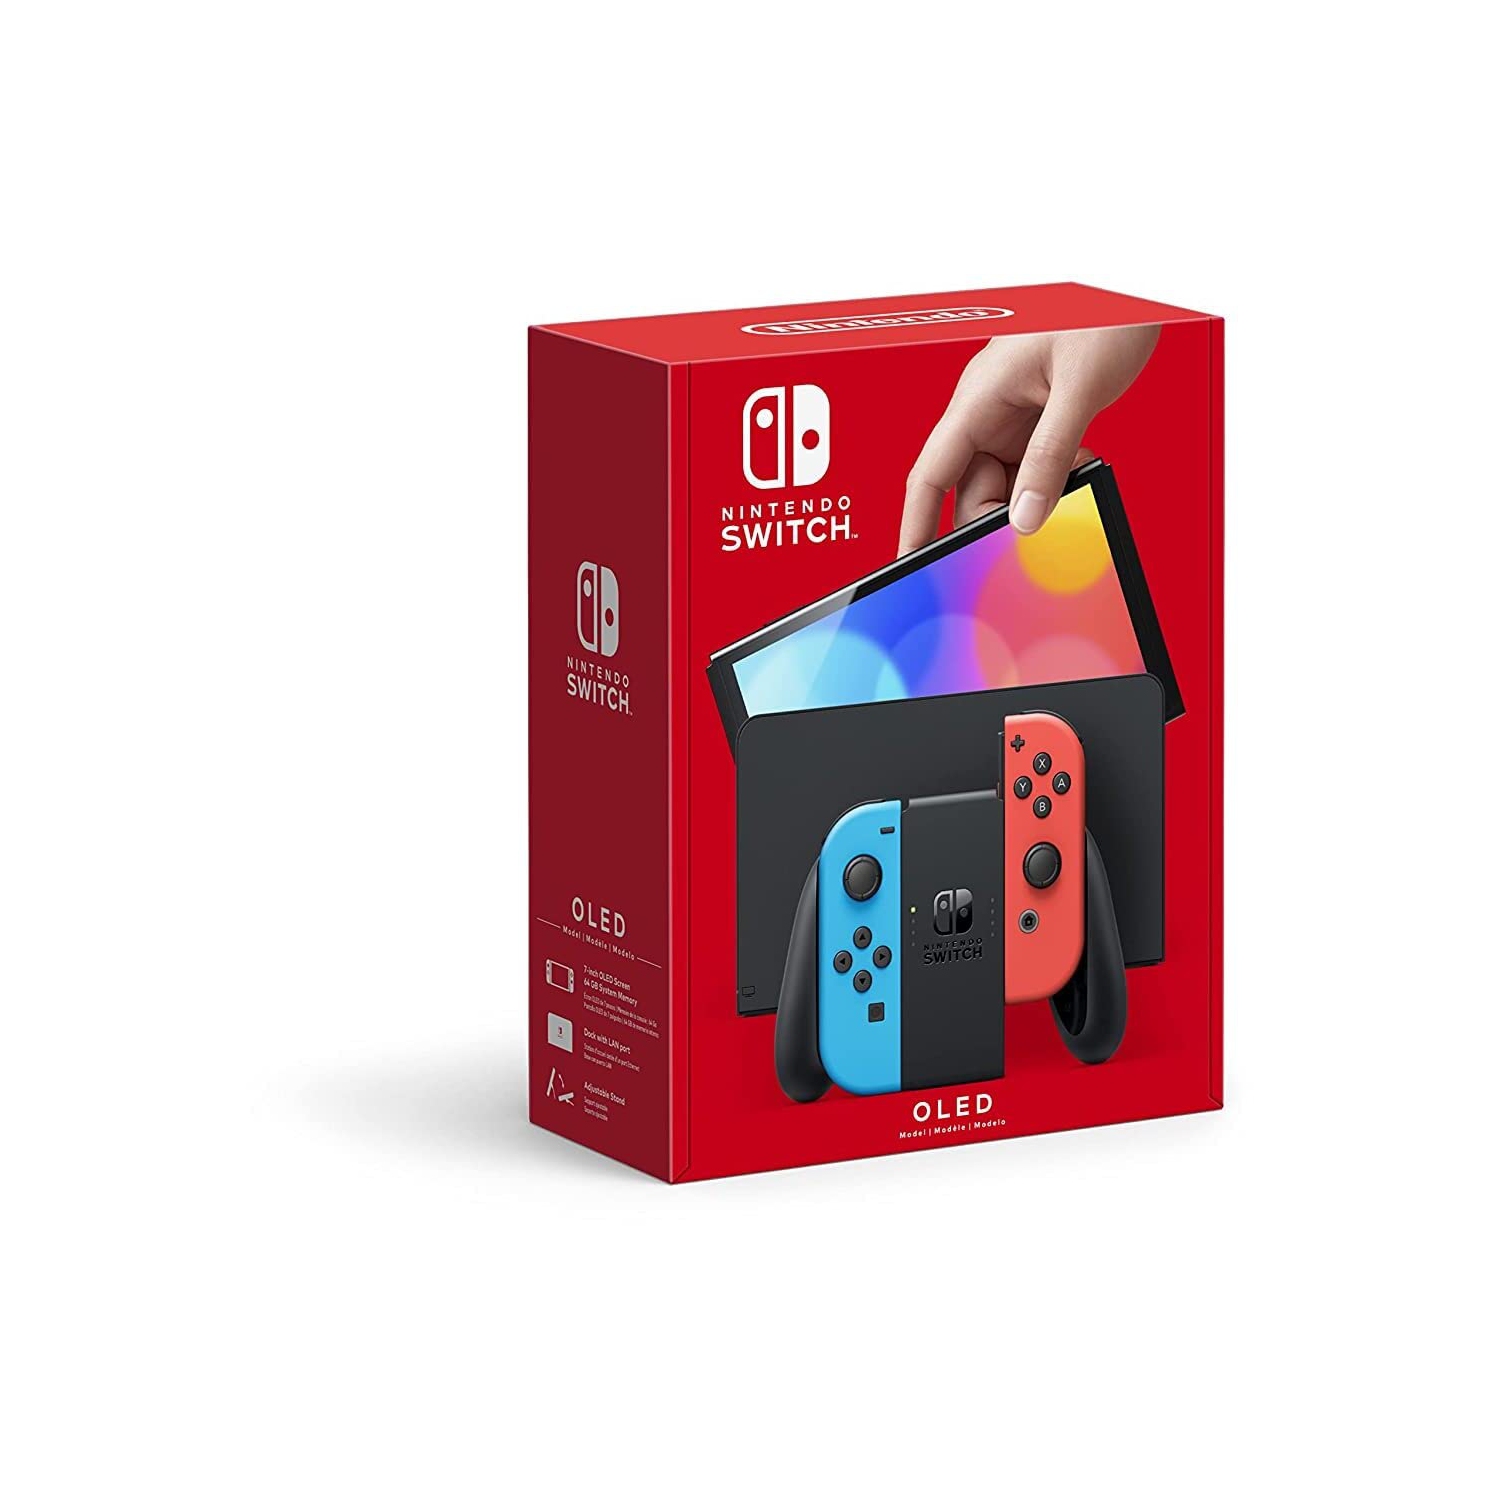 NINTENDO SWITCH OLED NEON BLUE/NEON RED - Brand New